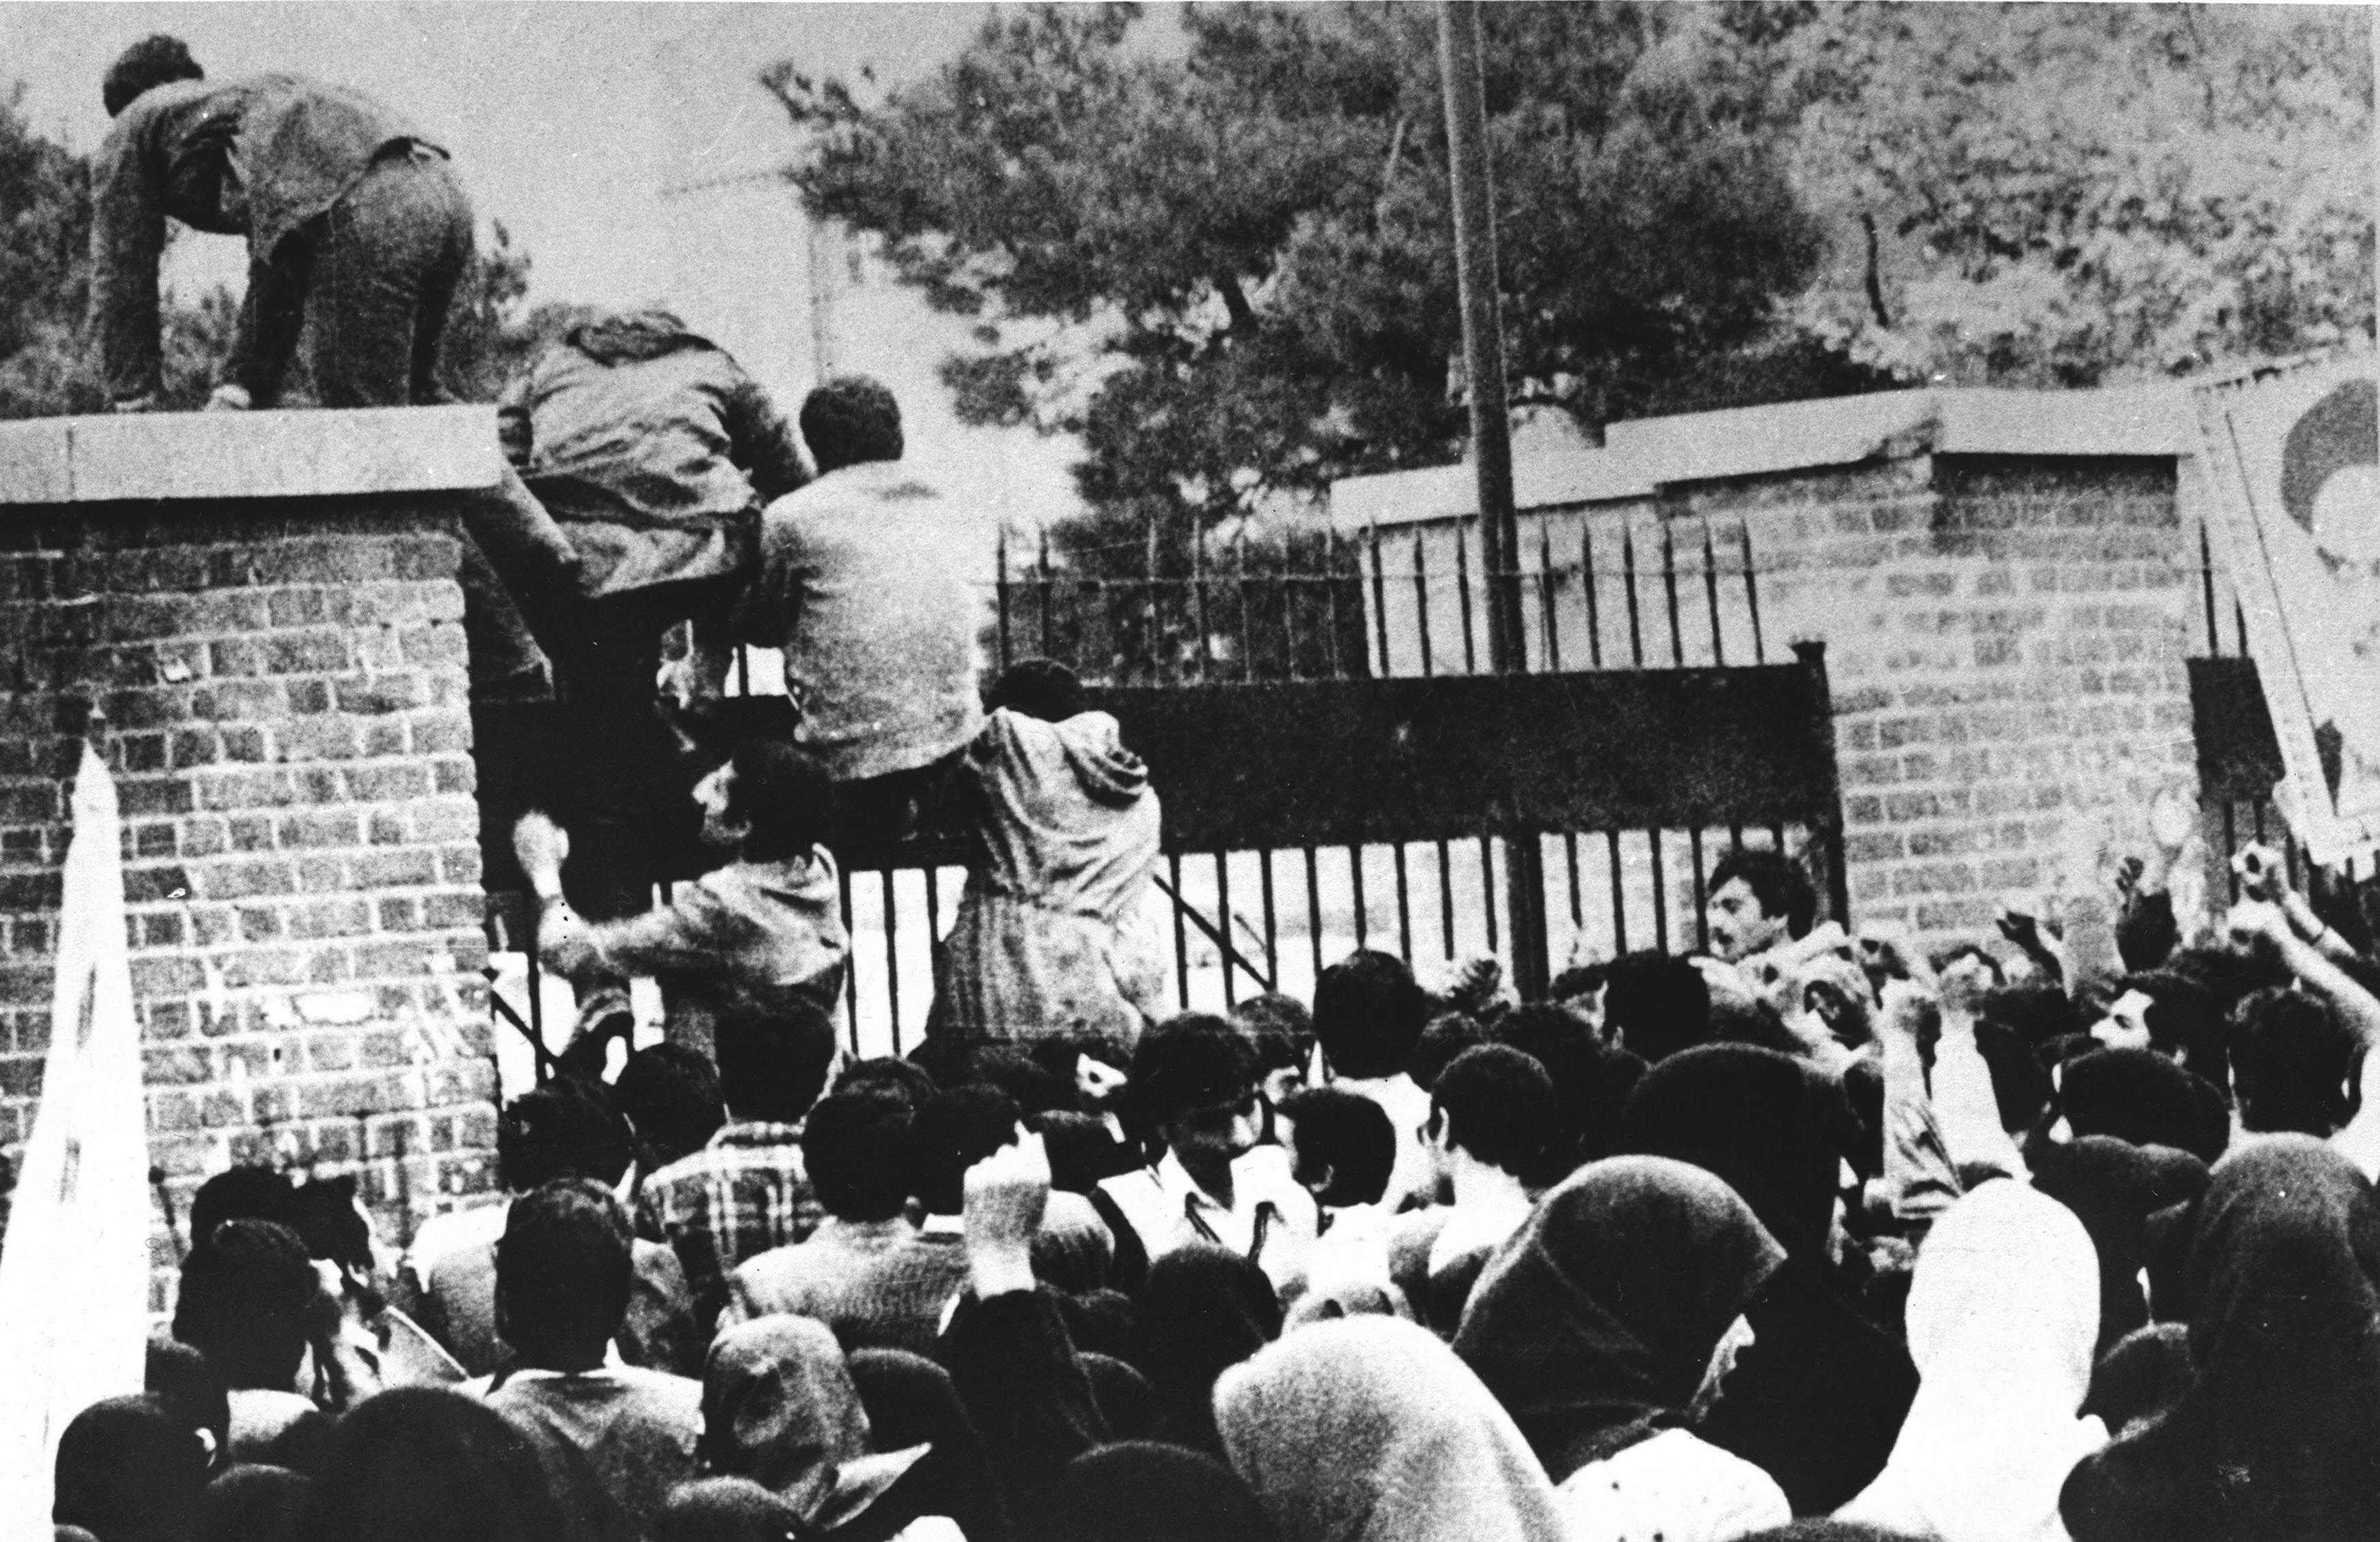 Iranian students climb over the wall of the U.S. Embassy in Tehran on November 4, 1979